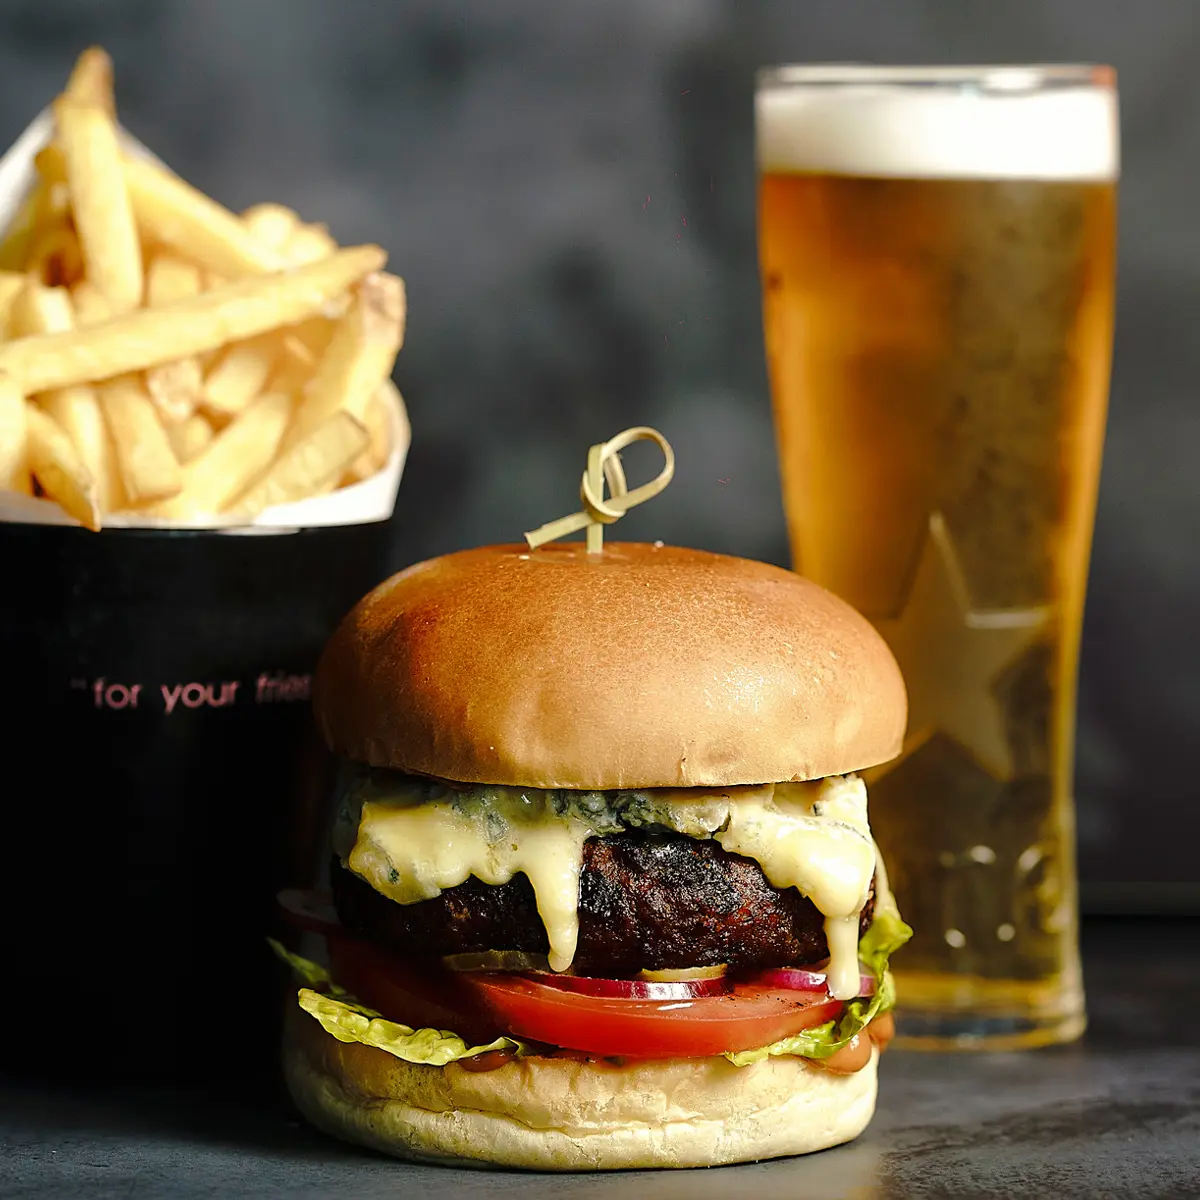 Cheeseburger served with fries and a pint of beer.